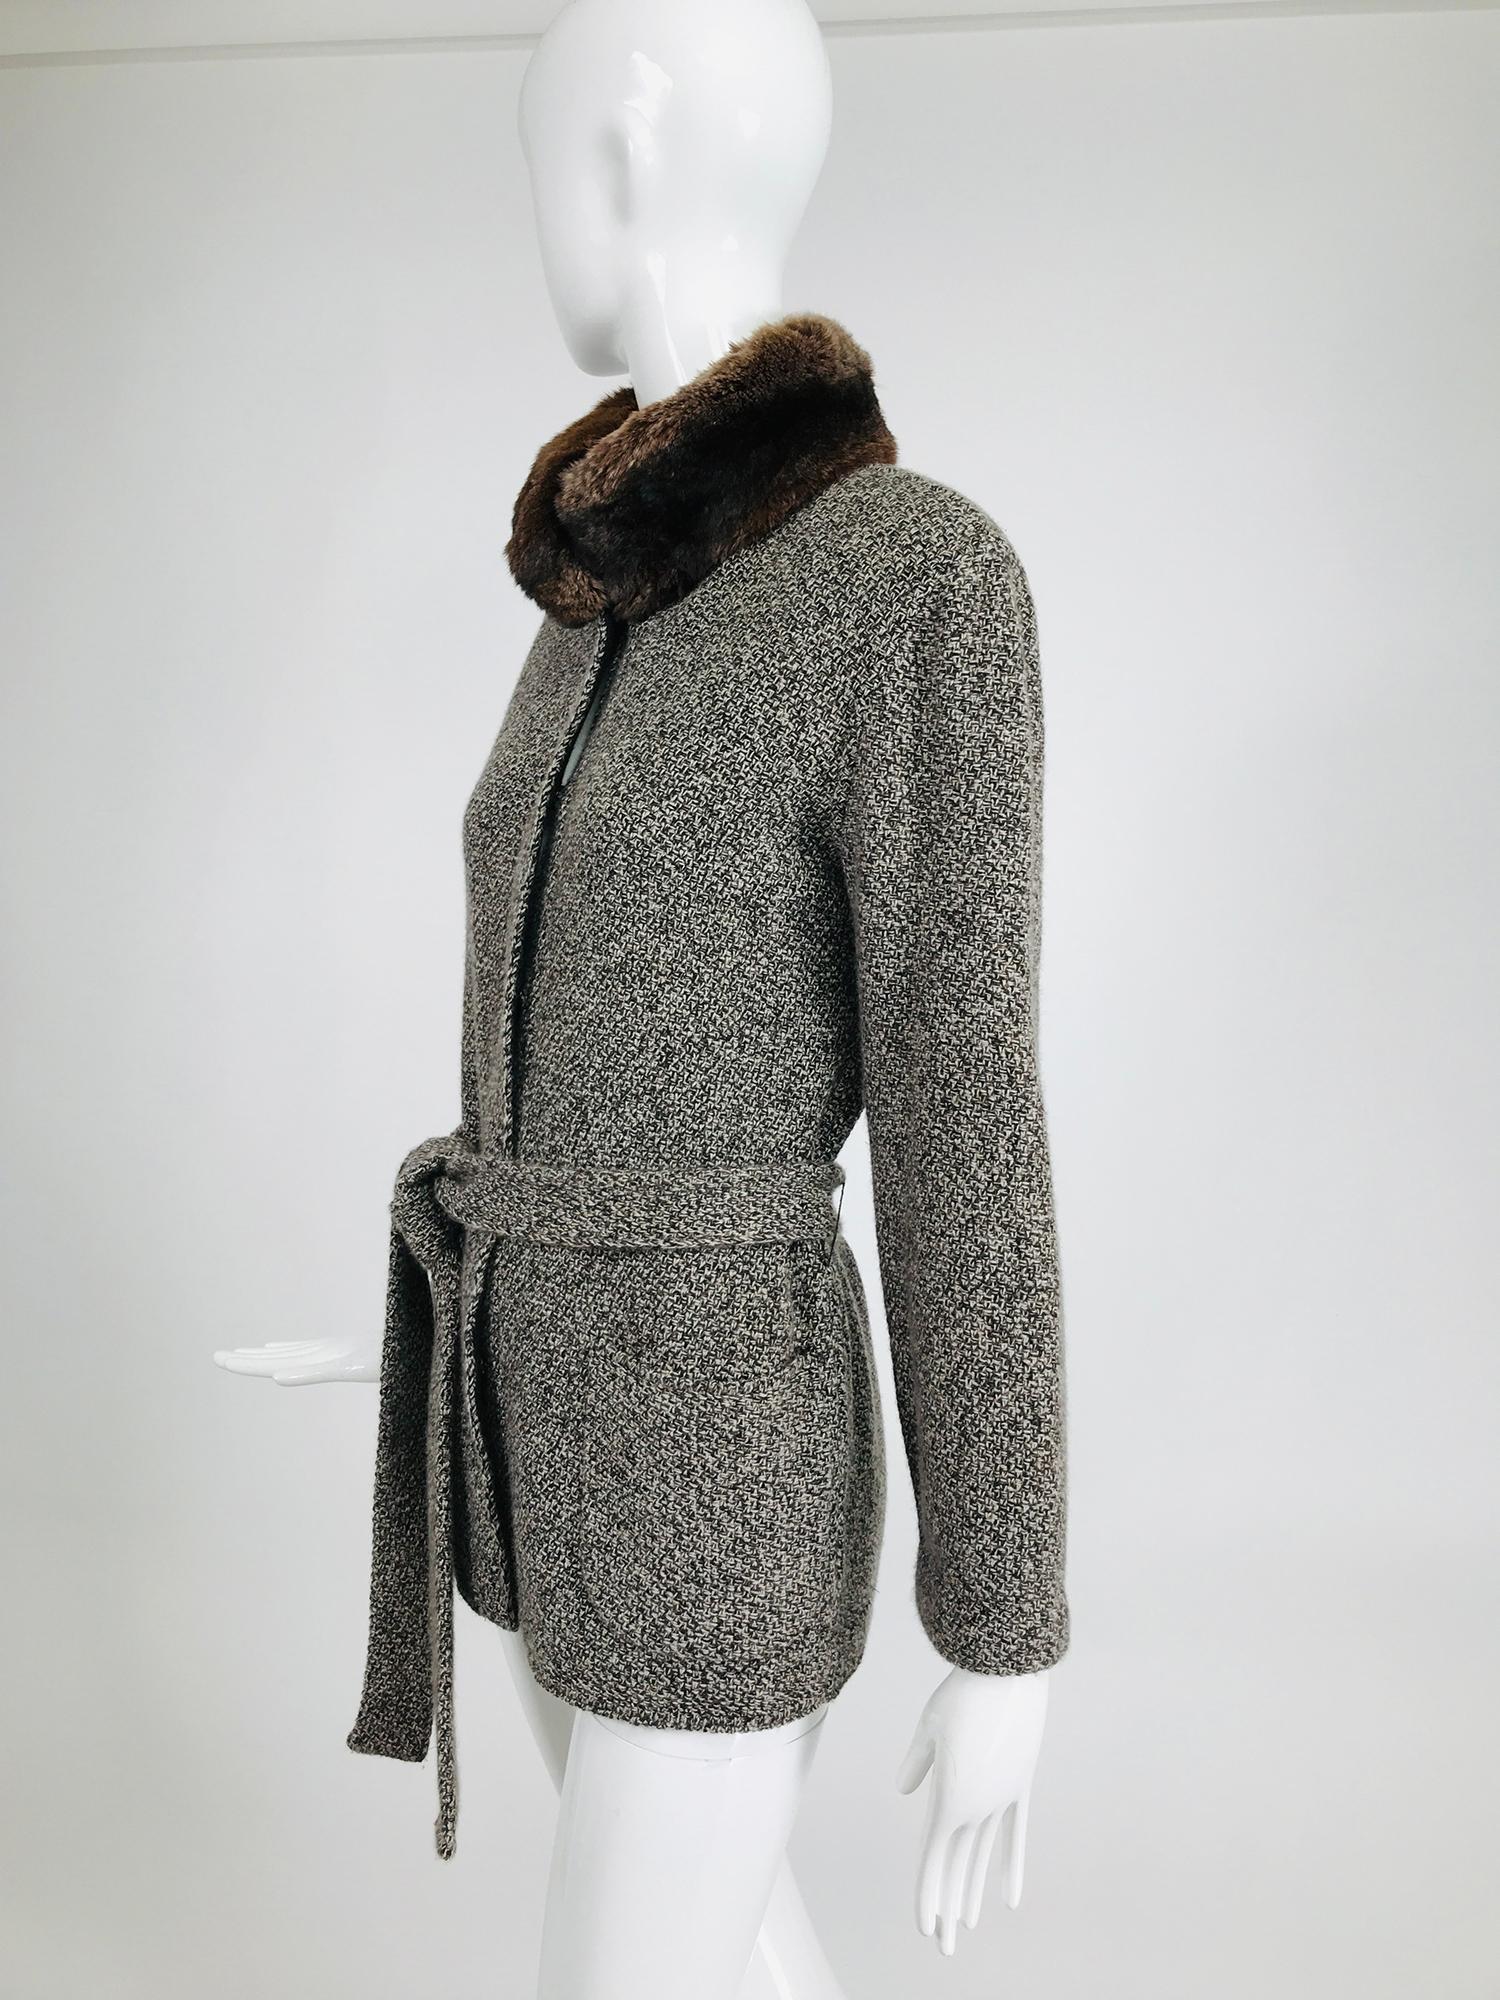 Loro Piana cashmere tweed belted sweater jacket with chinchilla collar. Knitted cashmere tweed in shades of brown & grey, the jacket closes at the front with large hidden, covered snaps, hip front patch pockets and long sleeves. The sweater comes